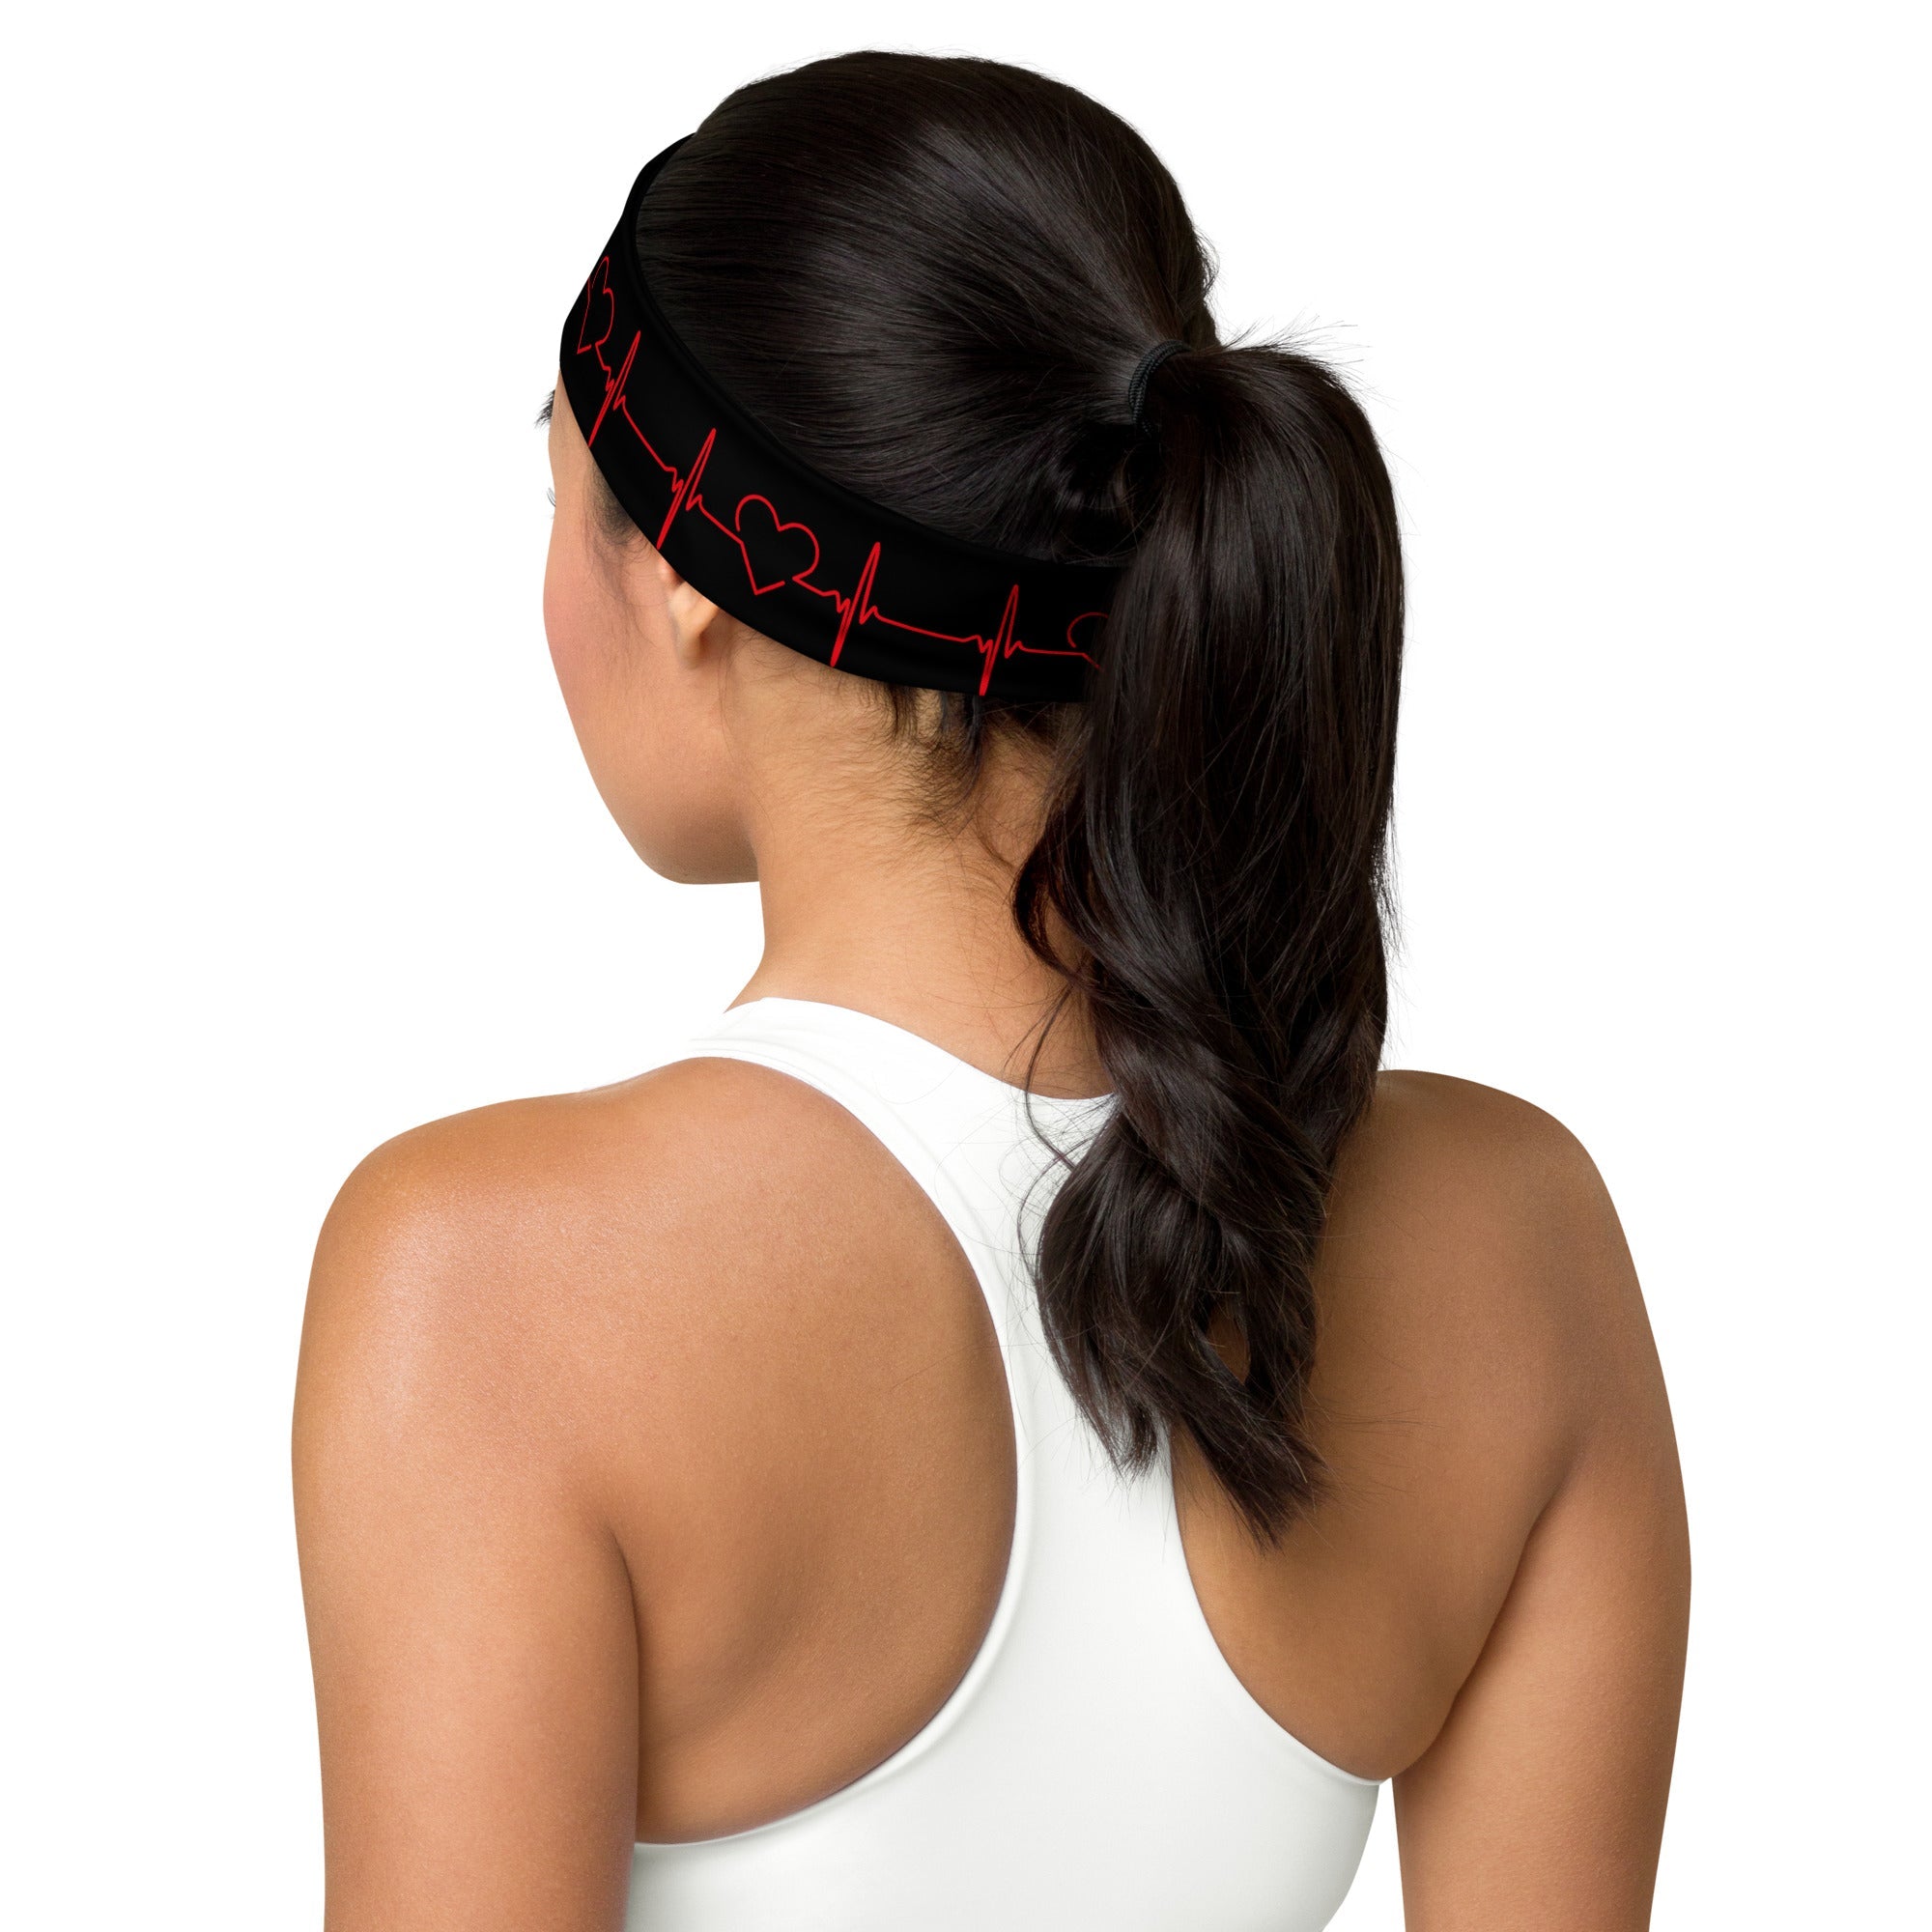 Stretchy Headbands - ECG pattern - Black and Red